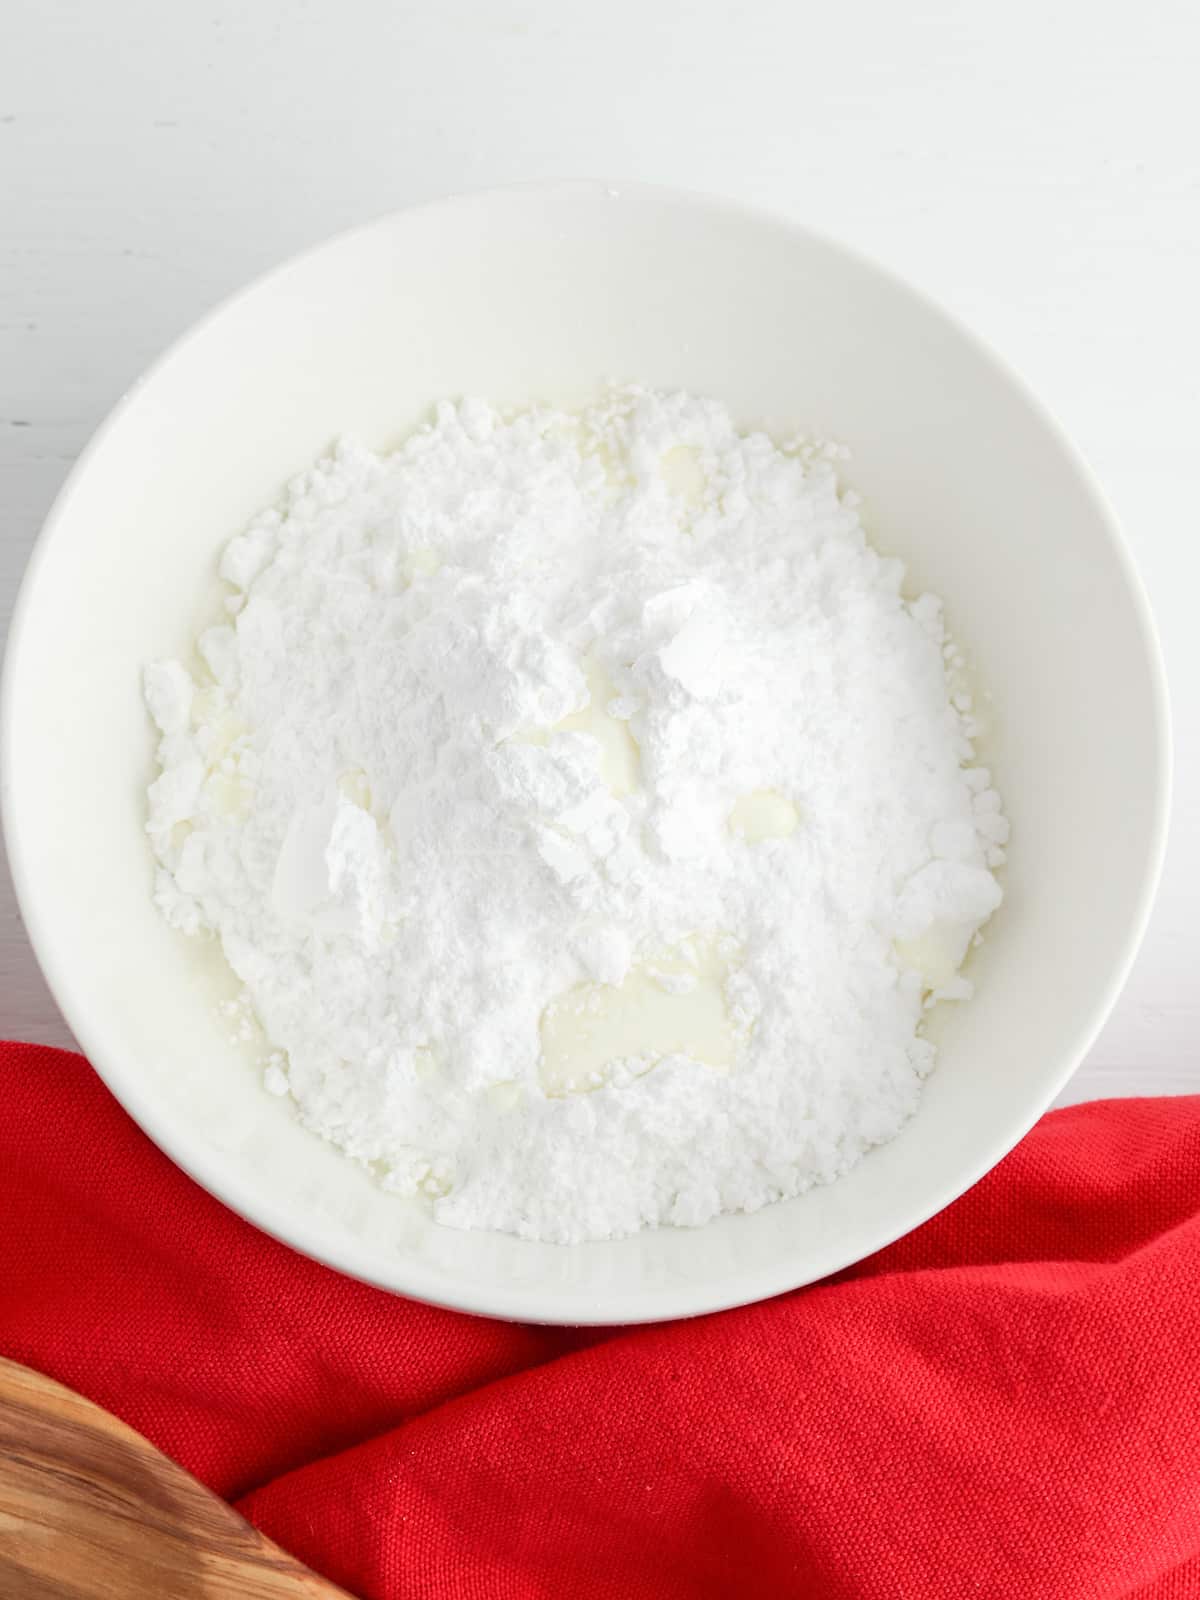 whisk together powdered sugar and cream for glaze